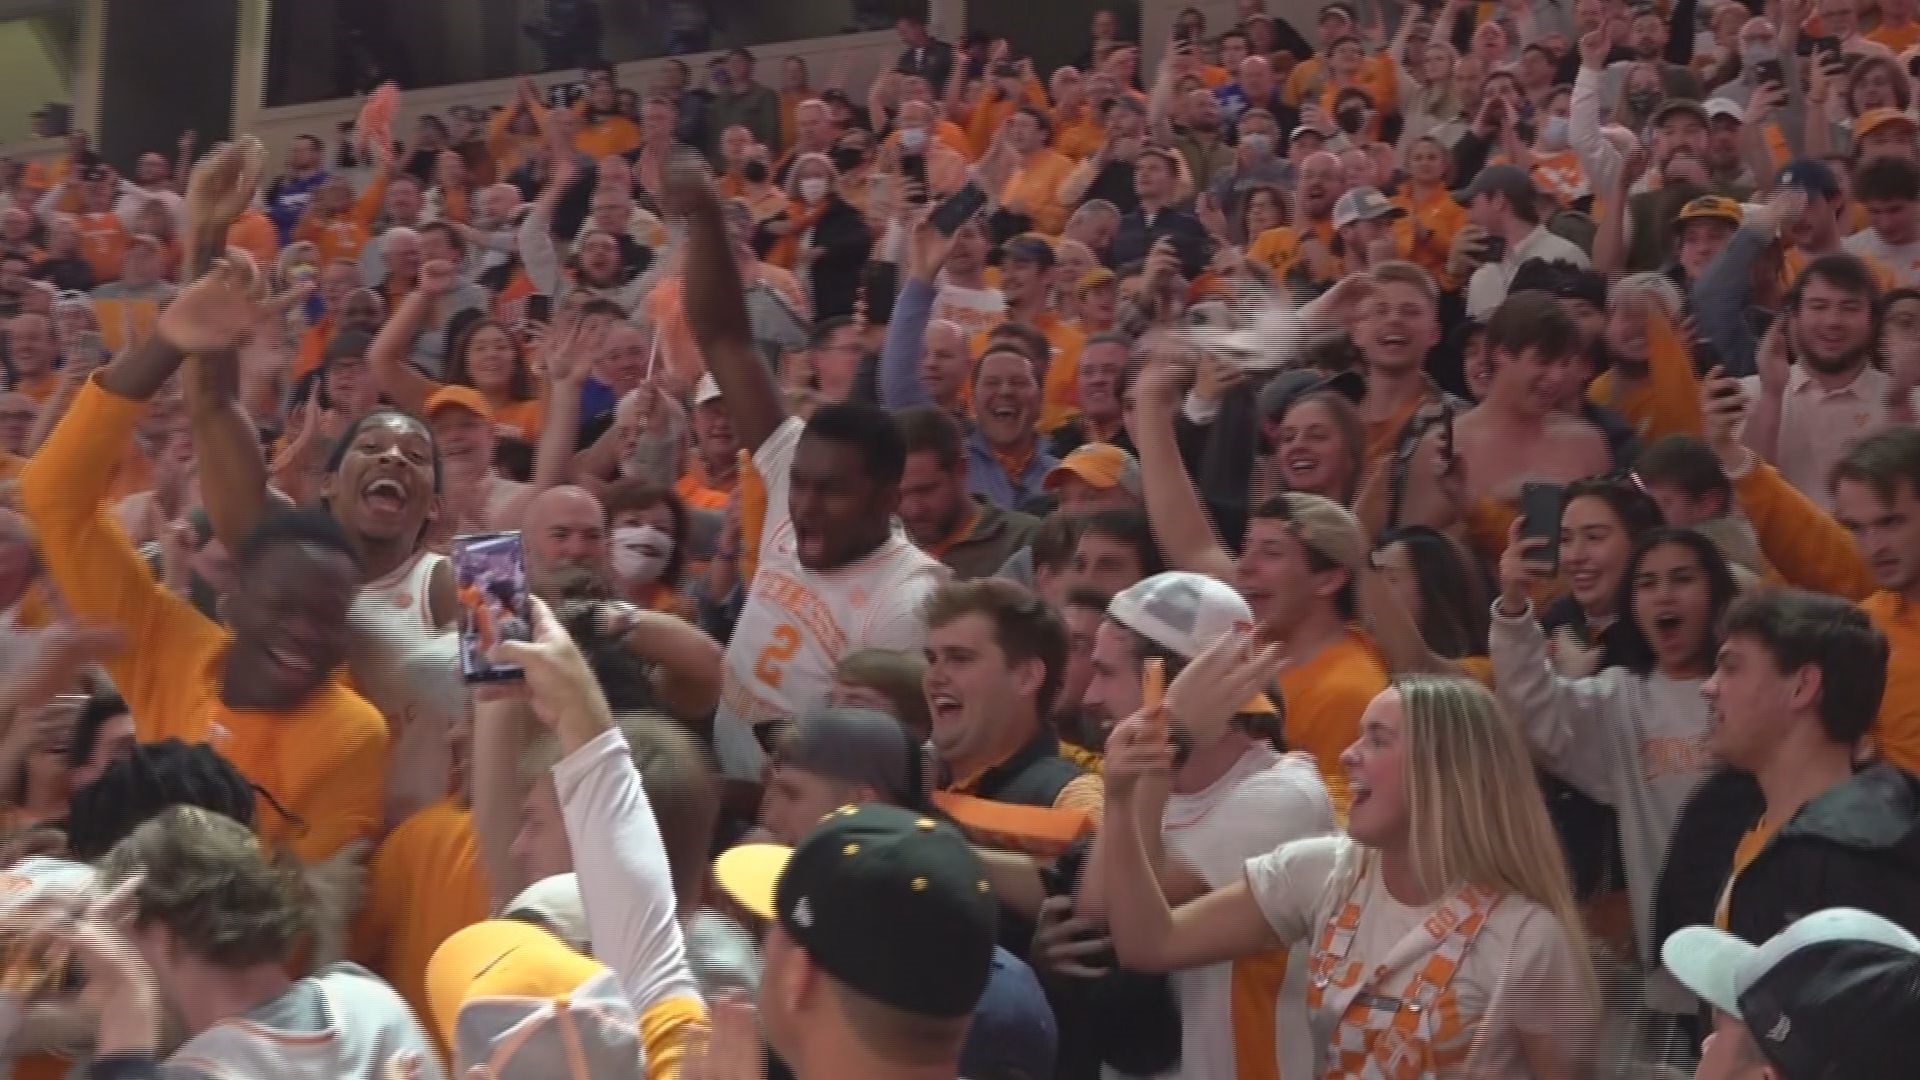 Some of the UT men's basketball players celebrated their win over the Wildcats in the student section.